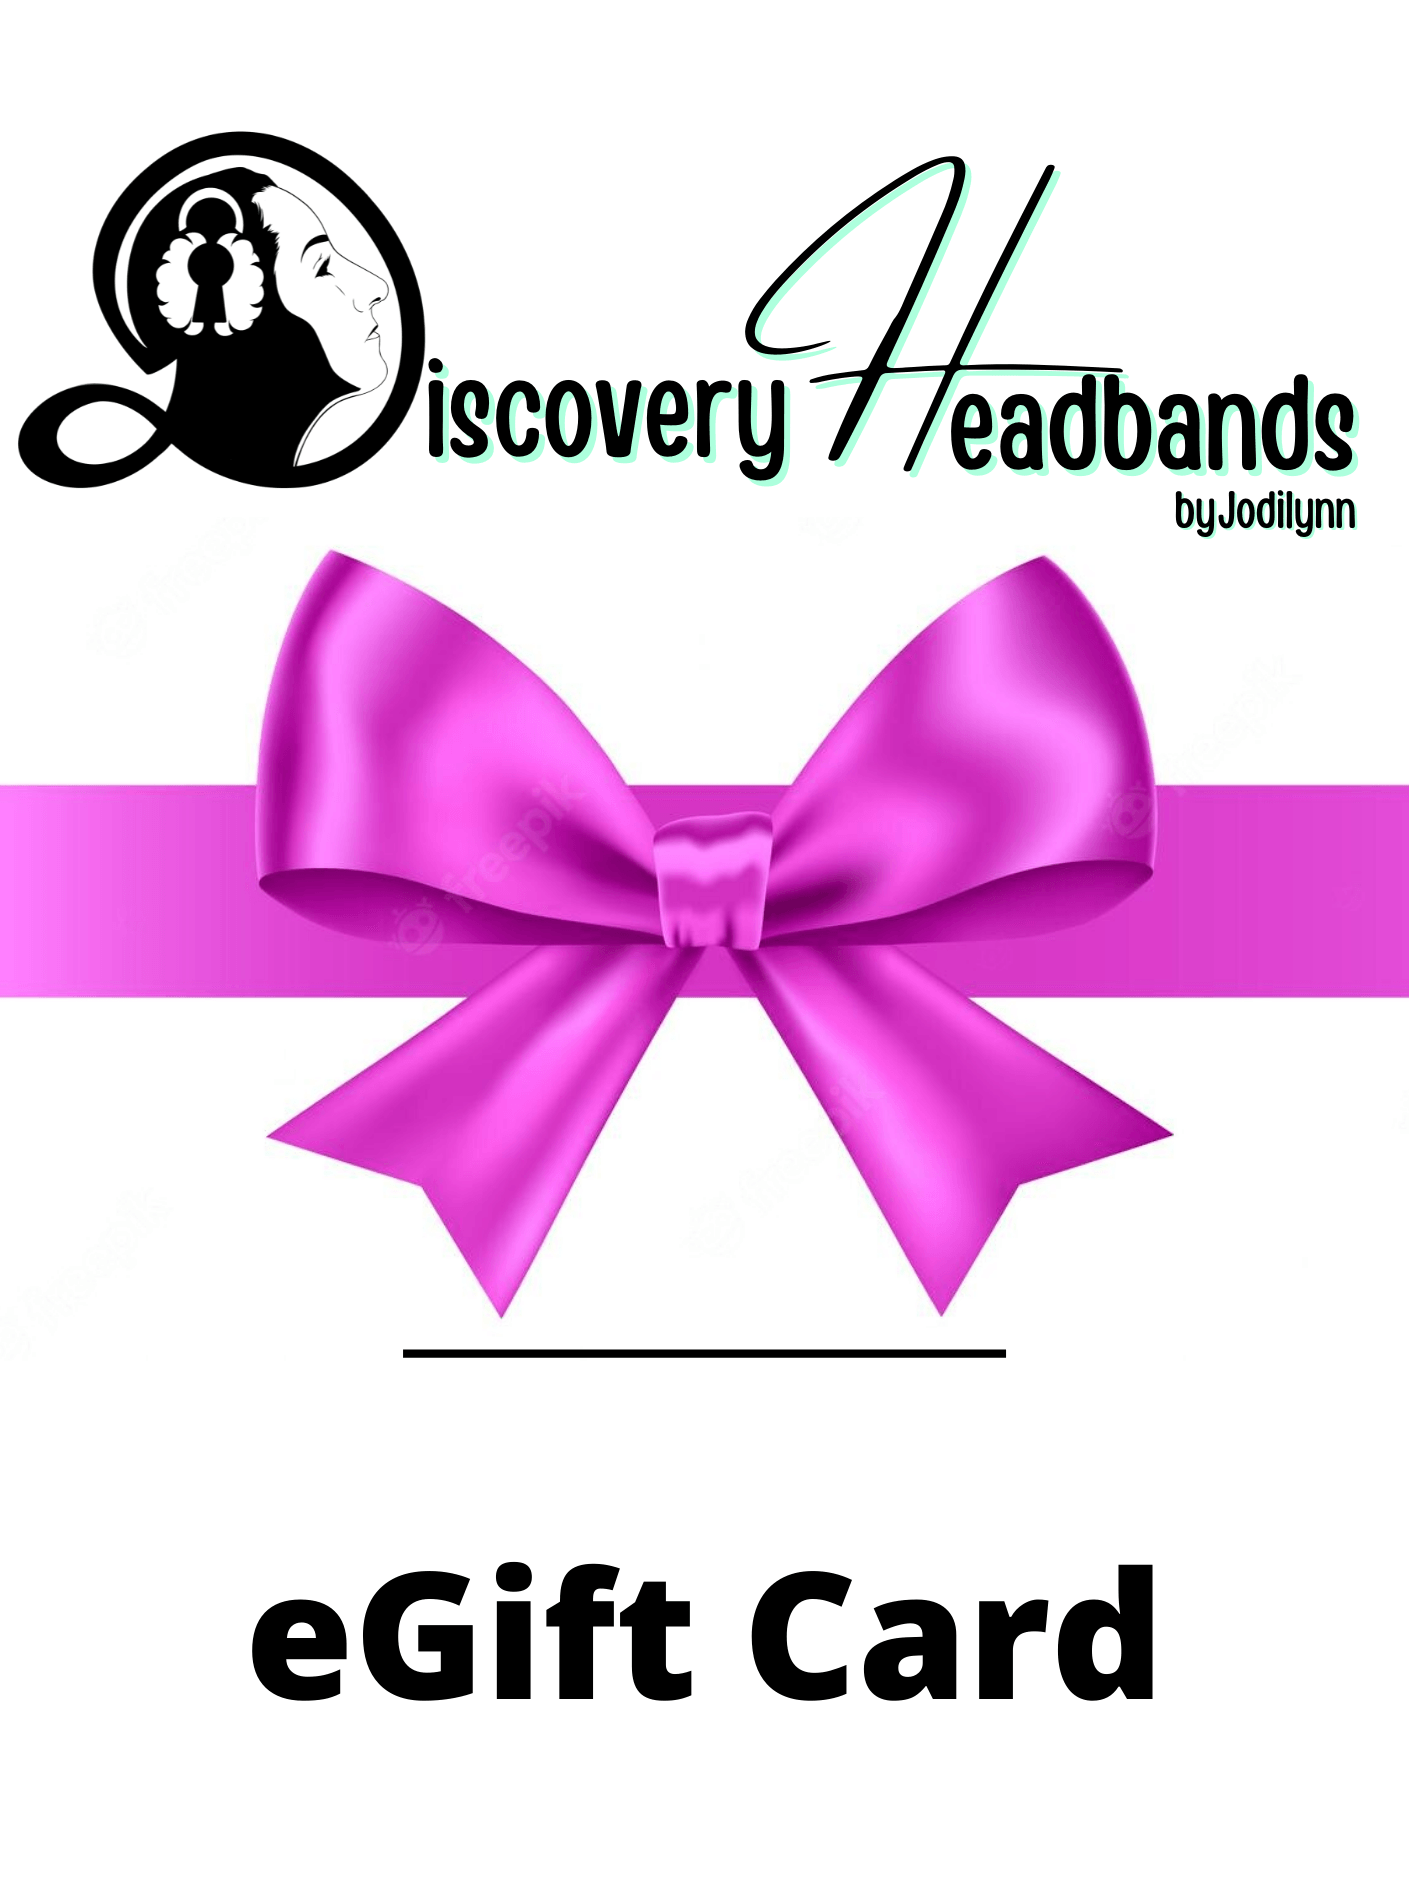 Discovery Headbands Gift Cards